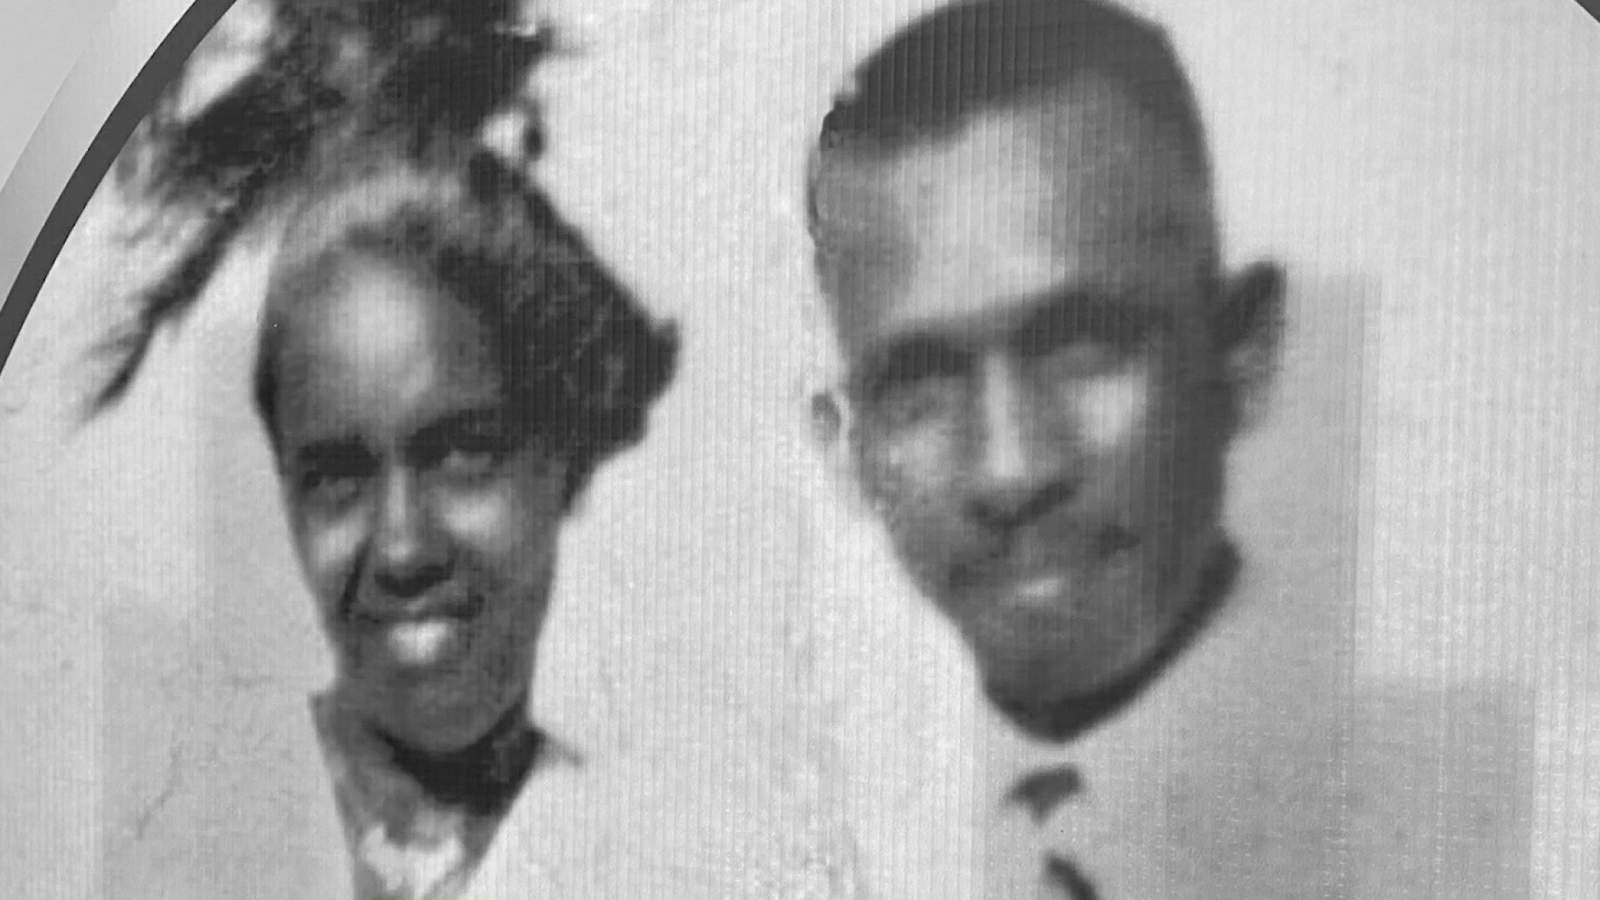 This couple challenged leaders for equal rights, established NAACP in Brevard County